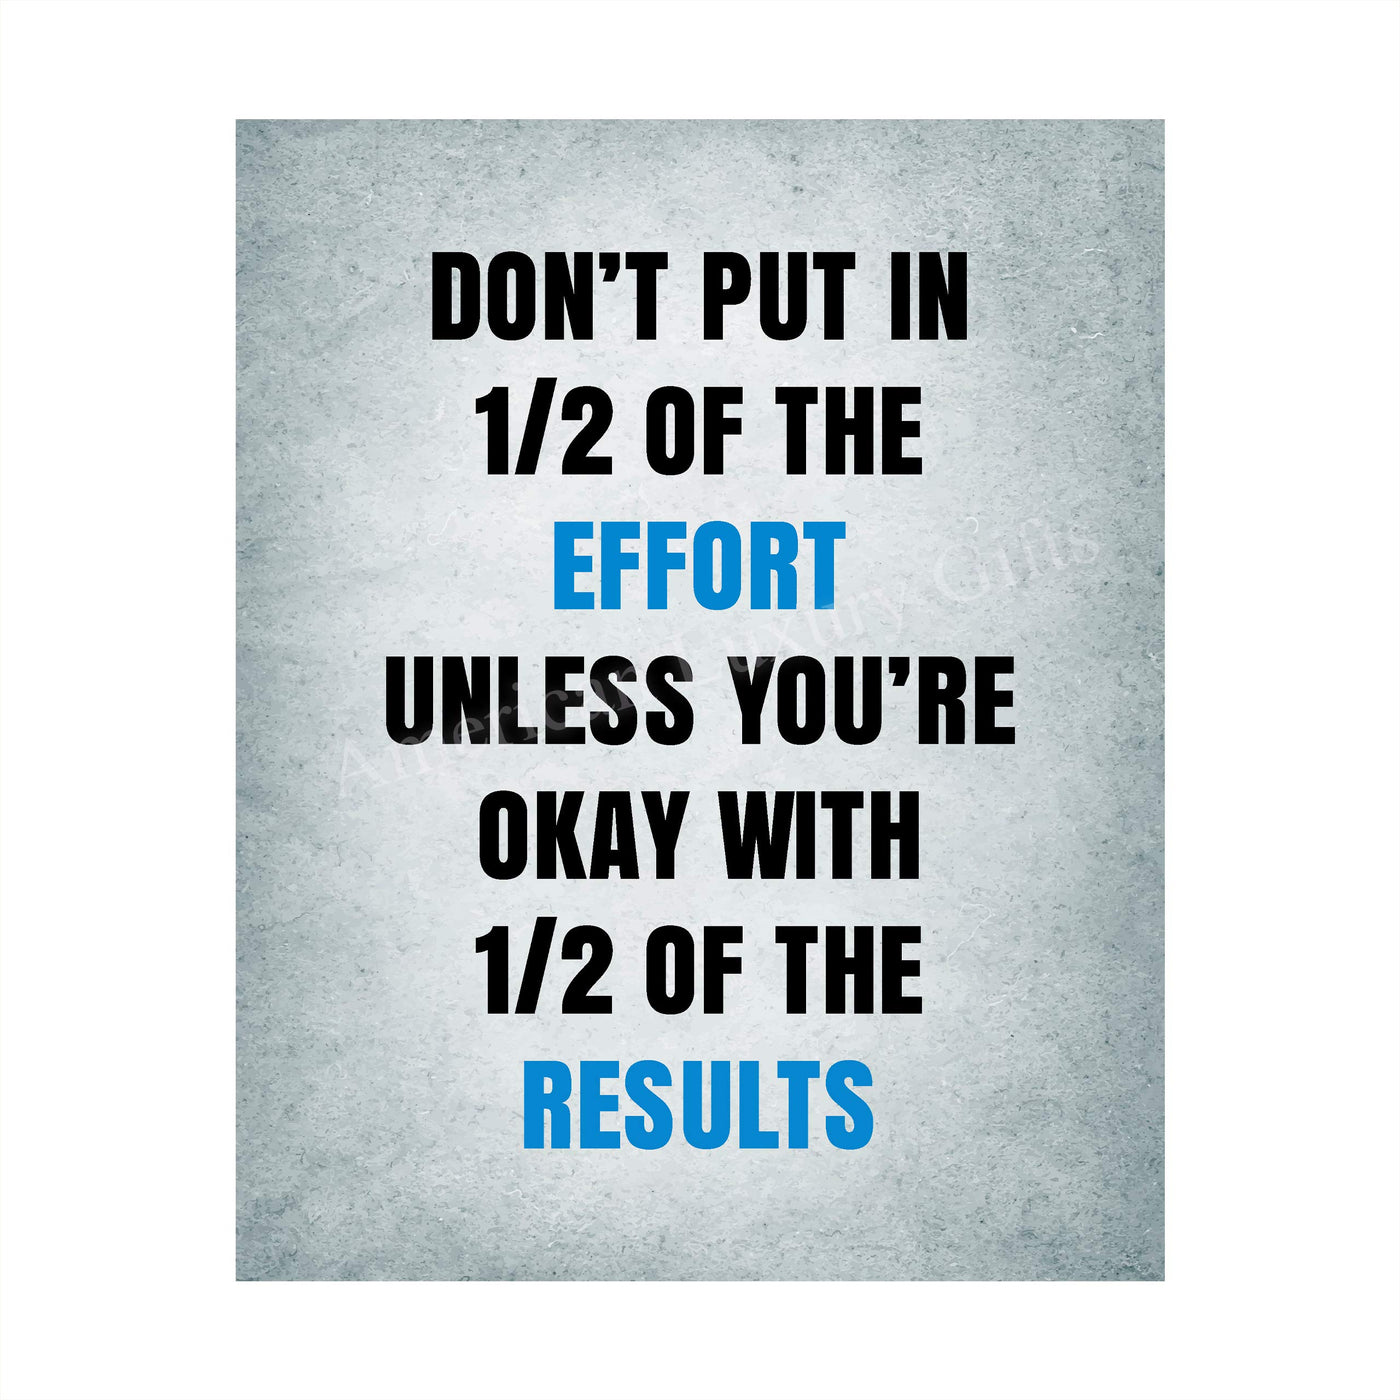 ?Don't Put In 1/2 the Effort Unless Ok With 1/2 the Results? Motivational Quotes Wall Art -8 x 10" Inspirational Poster Print-Ready to Frame. Home-Office-Dorm-Gym Decor. Perfect Sign for Motivation!